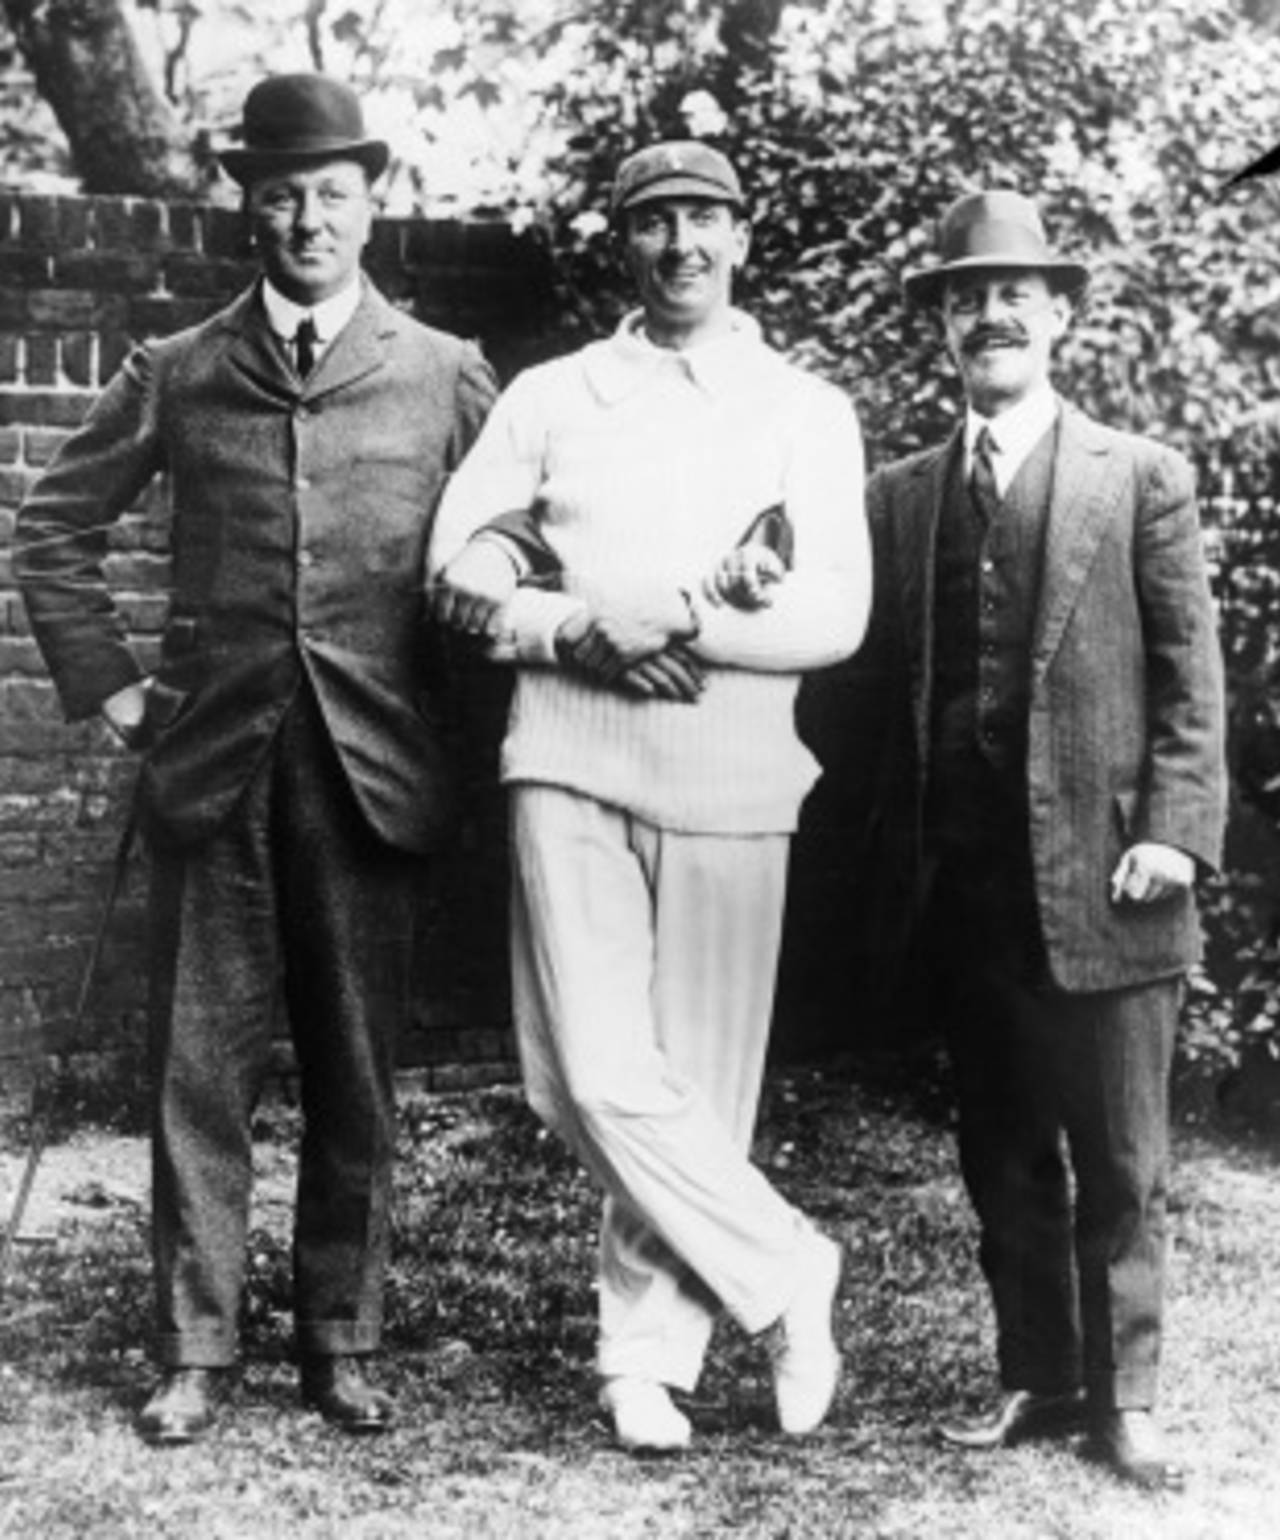 The three captains, Frank Mitchell (South Africa, left), CB Fry (England, middle) and Syd Gregory (Australia, right), pose ahead of the ill-fated 1912 Triangular Tournament. There were few smiles by the end&nbsp;&nbsp;&bull;&nbsp;&nbsp;The Cricketer International